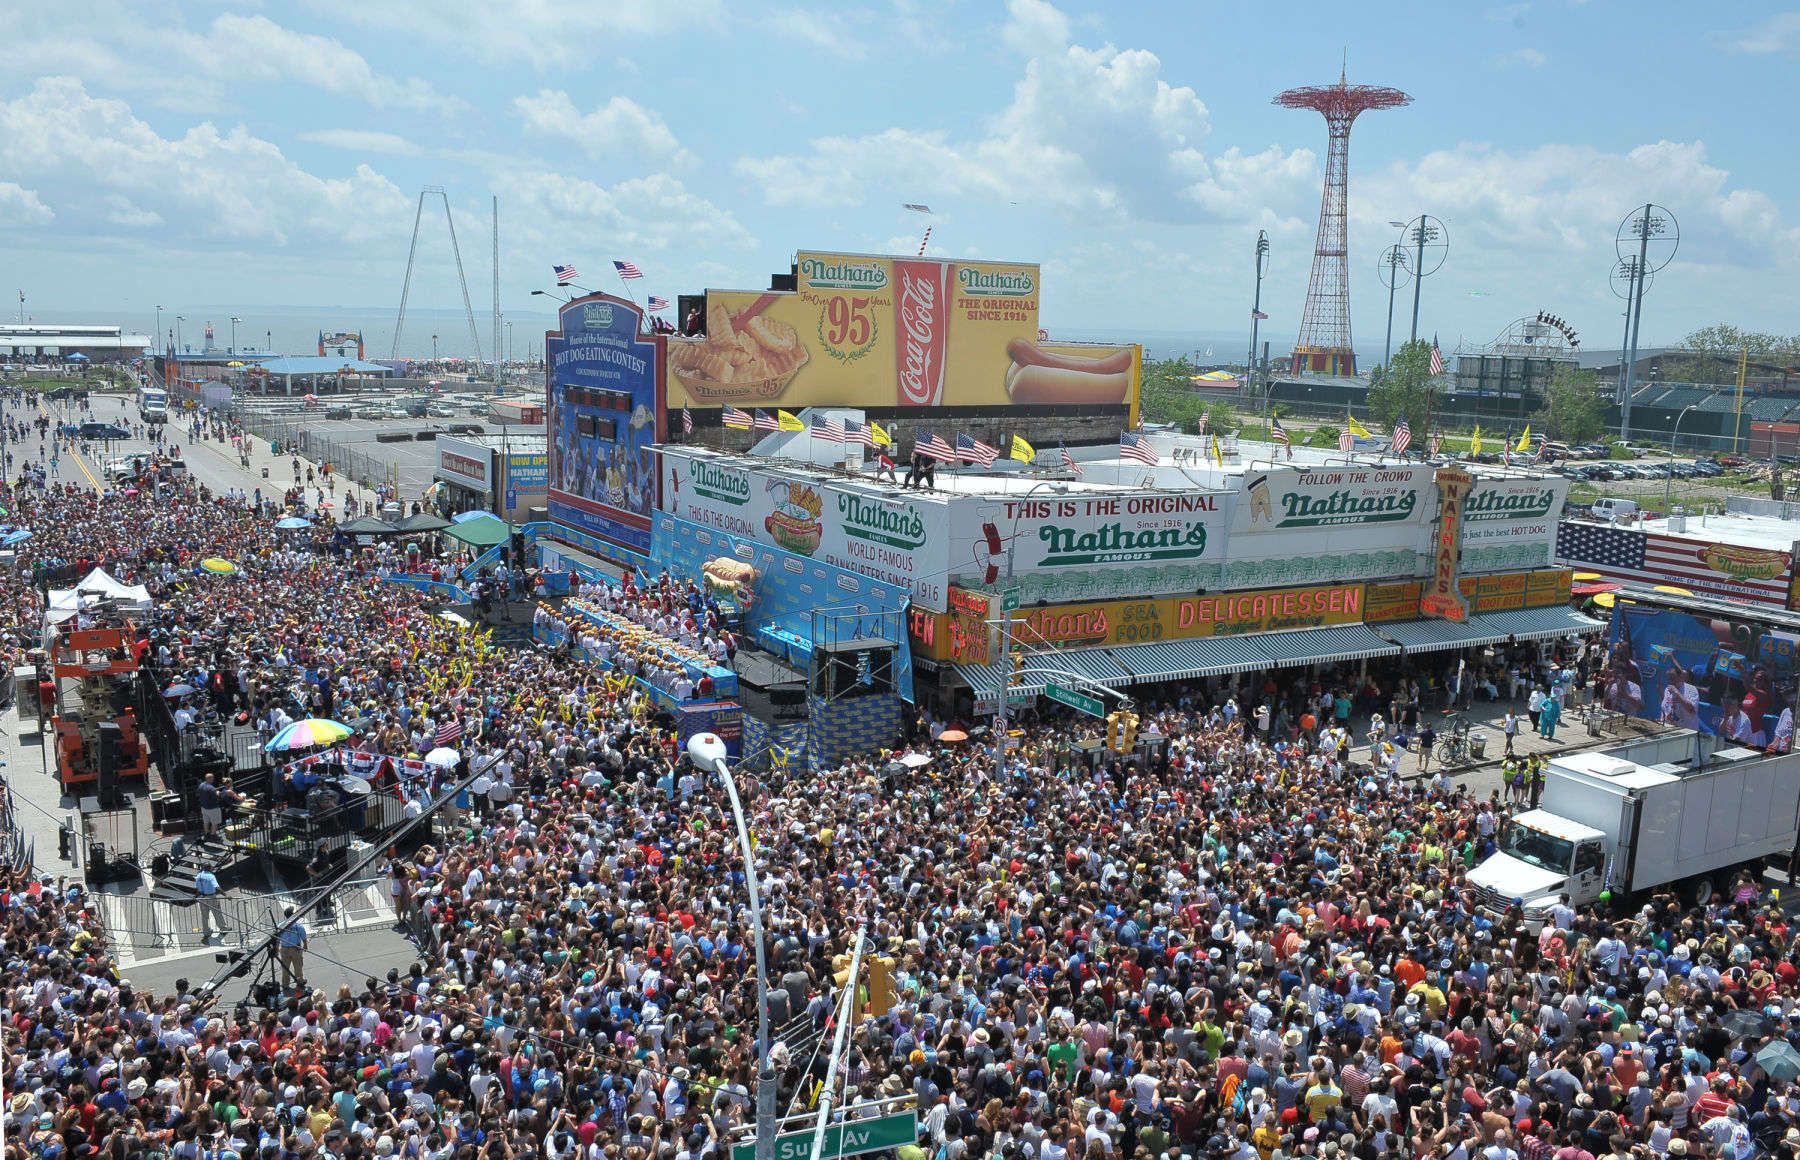 The annual July 4th Nathan's hot dog eating contest in Coney Island Brooklyn.